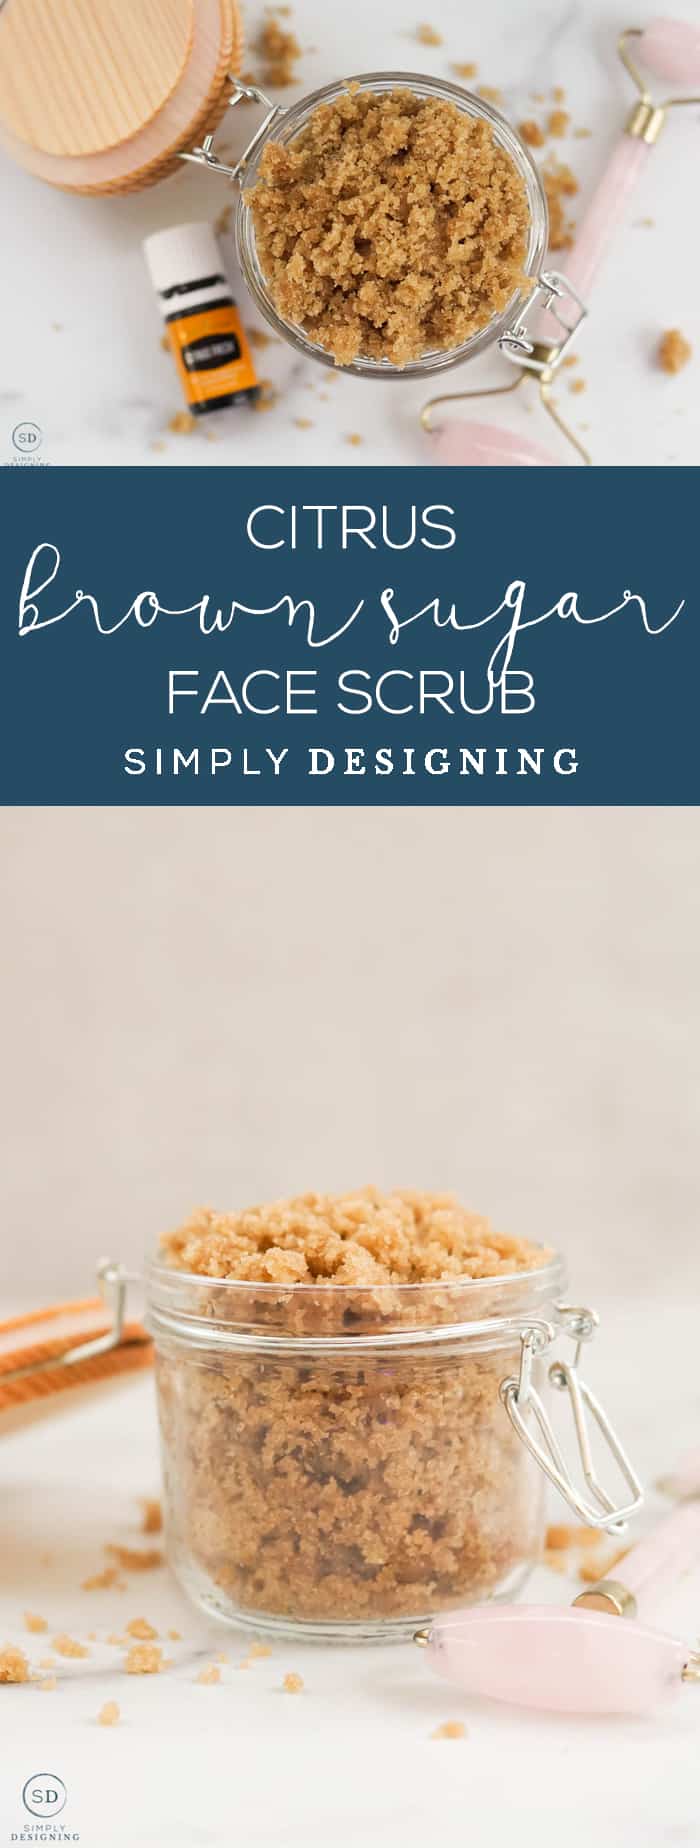 This citrus brown sugar face scrub is a natural way to exfoliate your skin from the comfort of your own home